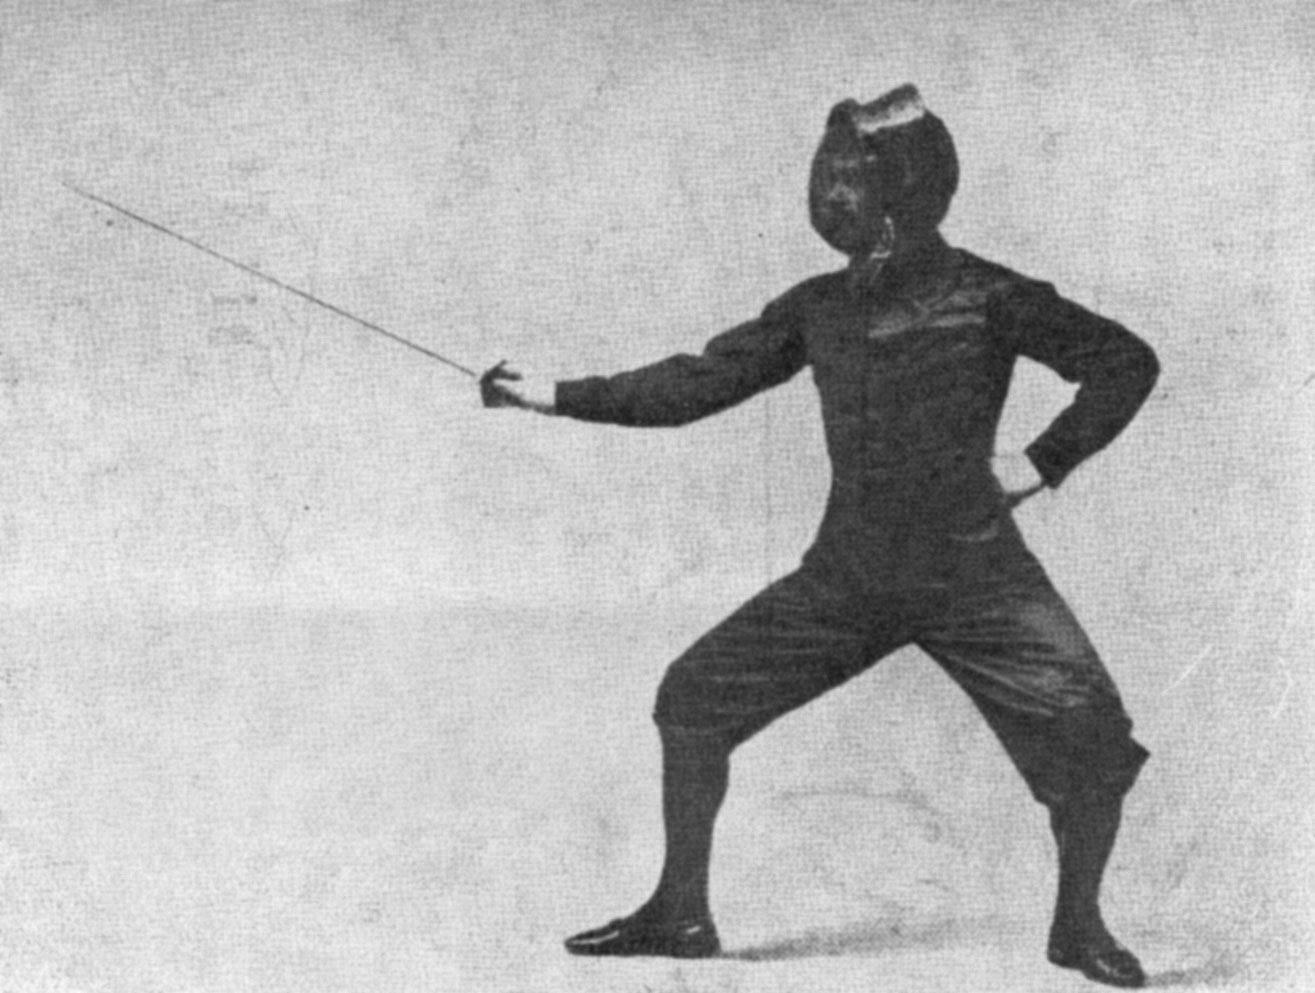 Fencing Equipment List Essential Gear for Beginners and Pros